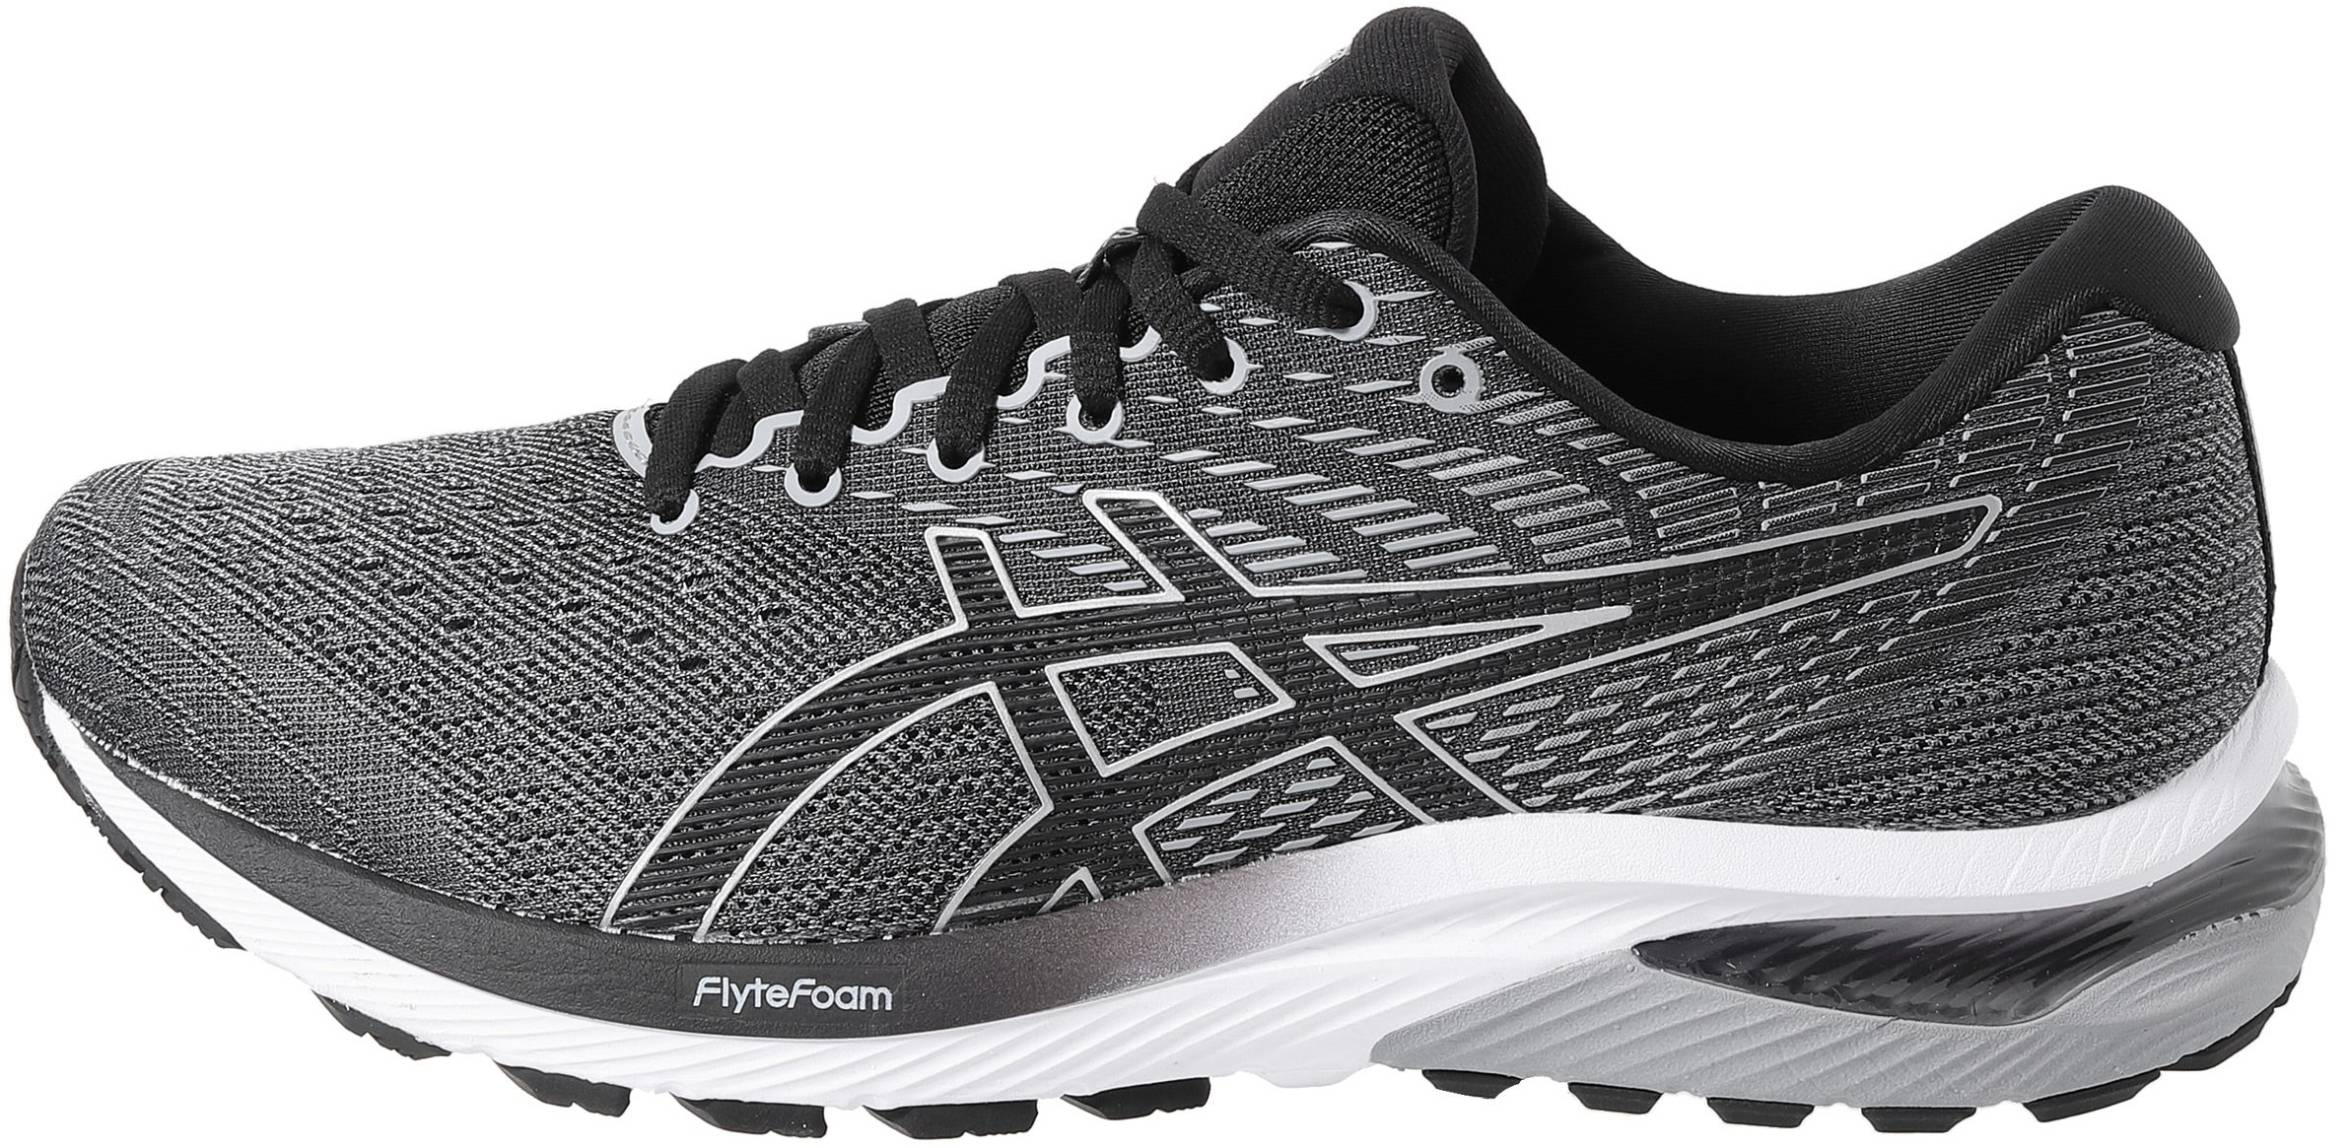 Save 25% on Wide Asics Running Shoes 